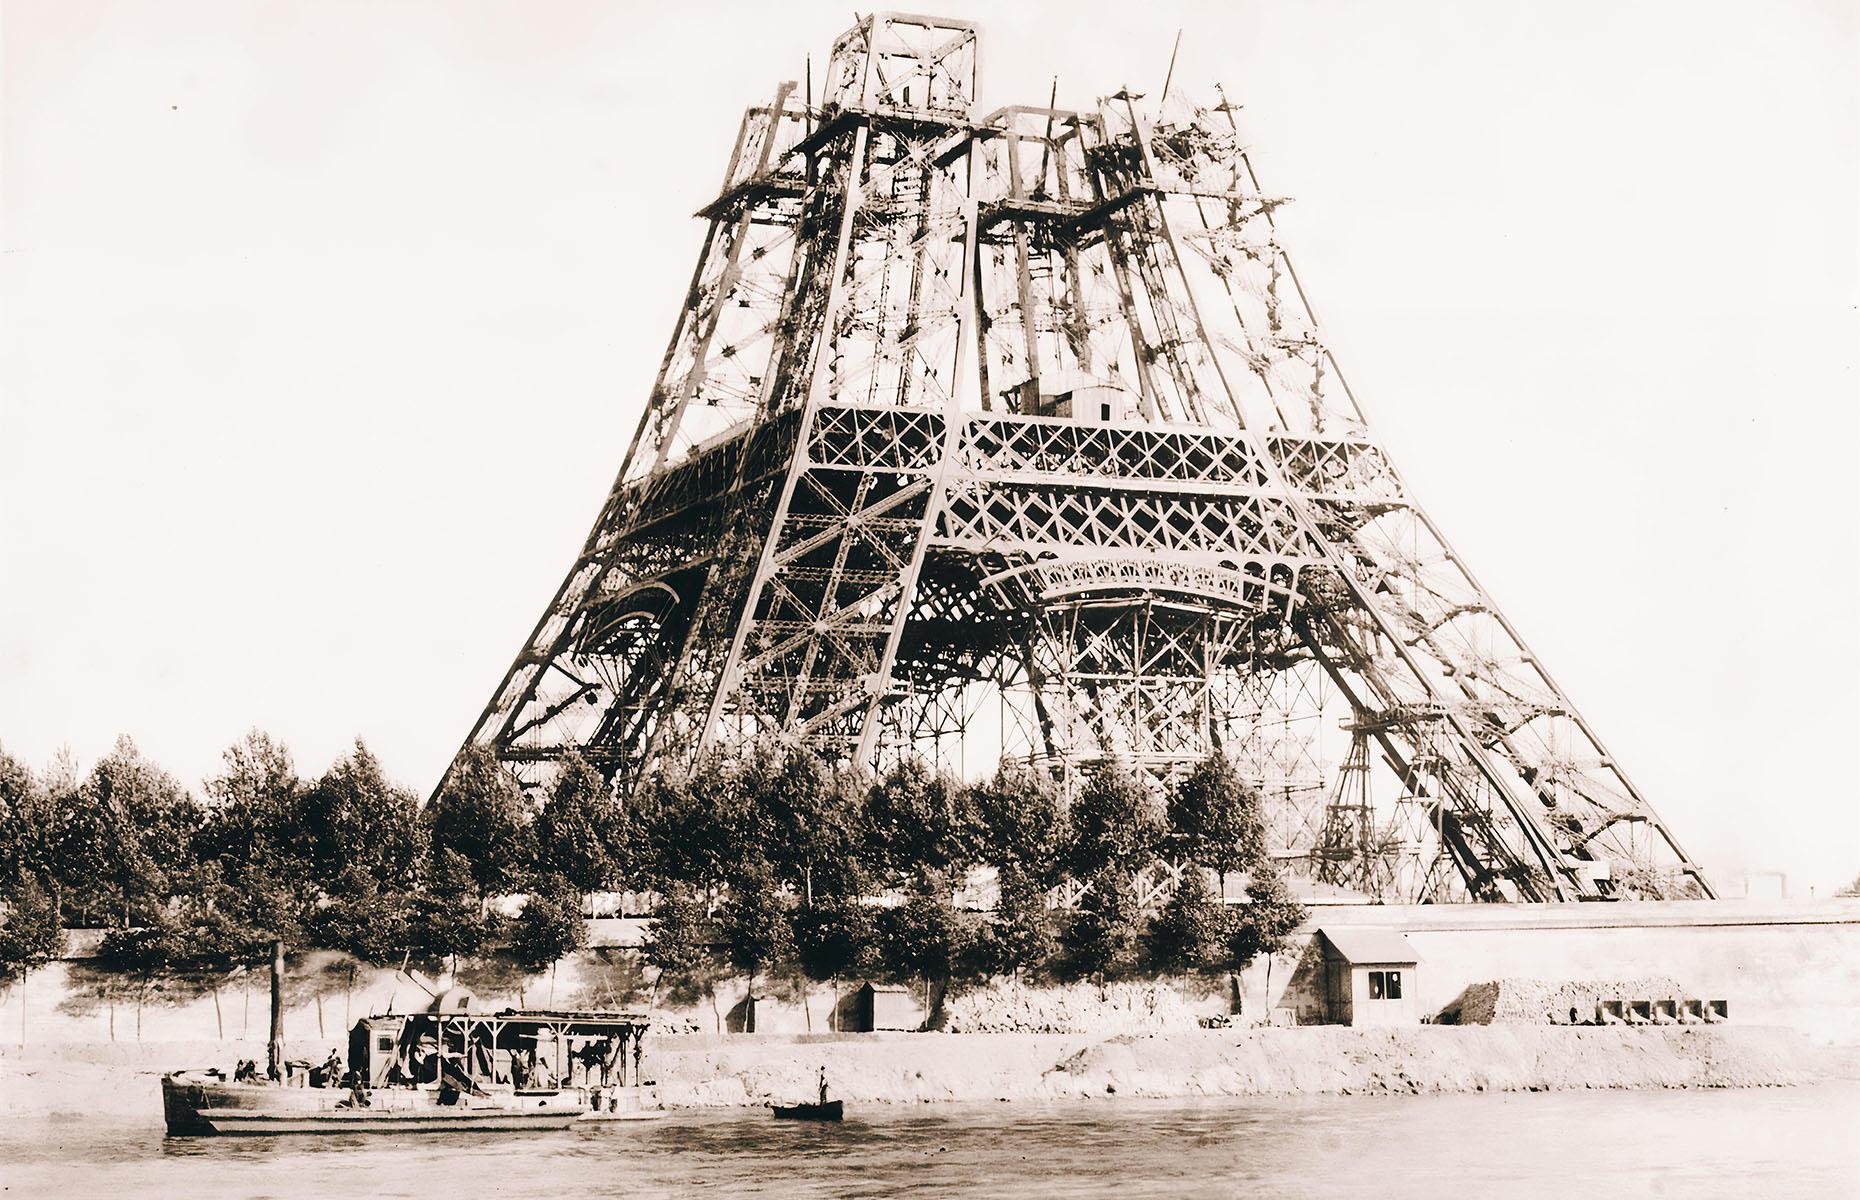 <p>It’s hard to believe now, but when the Eiffel Tower was finally completed in 1889, it was not loved by everyone. In fact, the French novelist Leon Bloy called it a "truly tragic street lamp". The general public disagreed, with just under two million of them climbing the tower the year it was opened. Now considered a symbol not just of Paris but of France as well, the Eiffel Tower attracts nearly seven million visitors a year.</p>